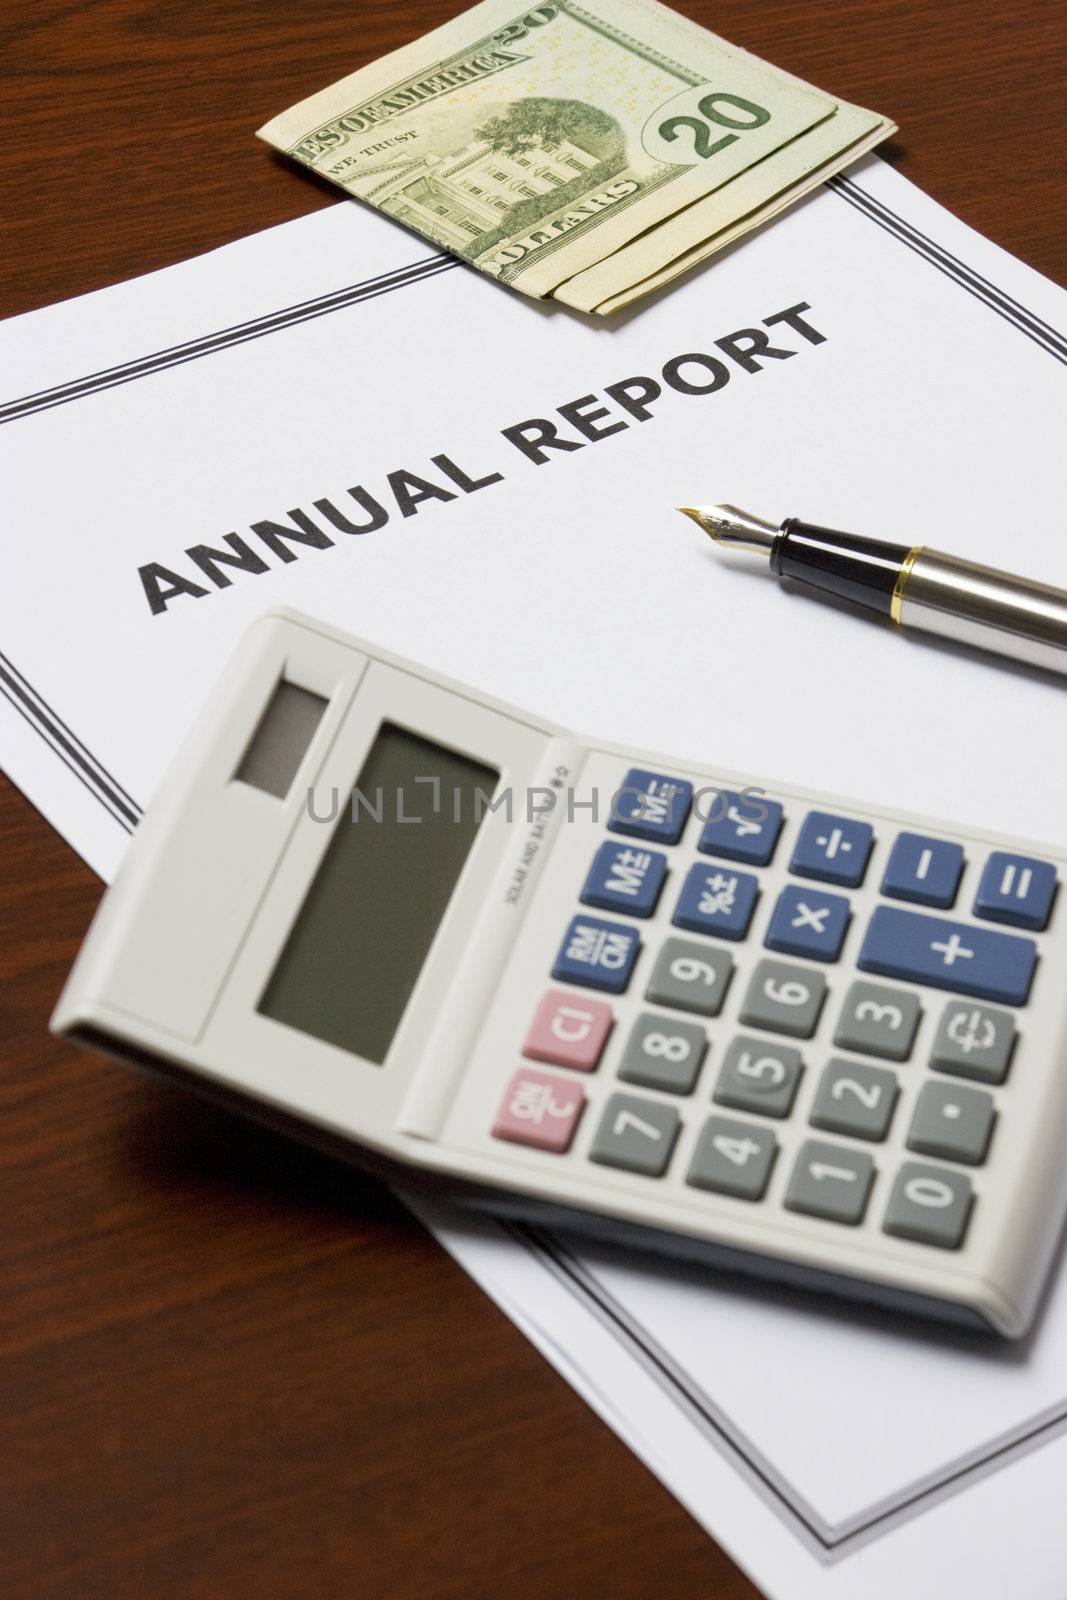 Image of an annual company report on an office table.